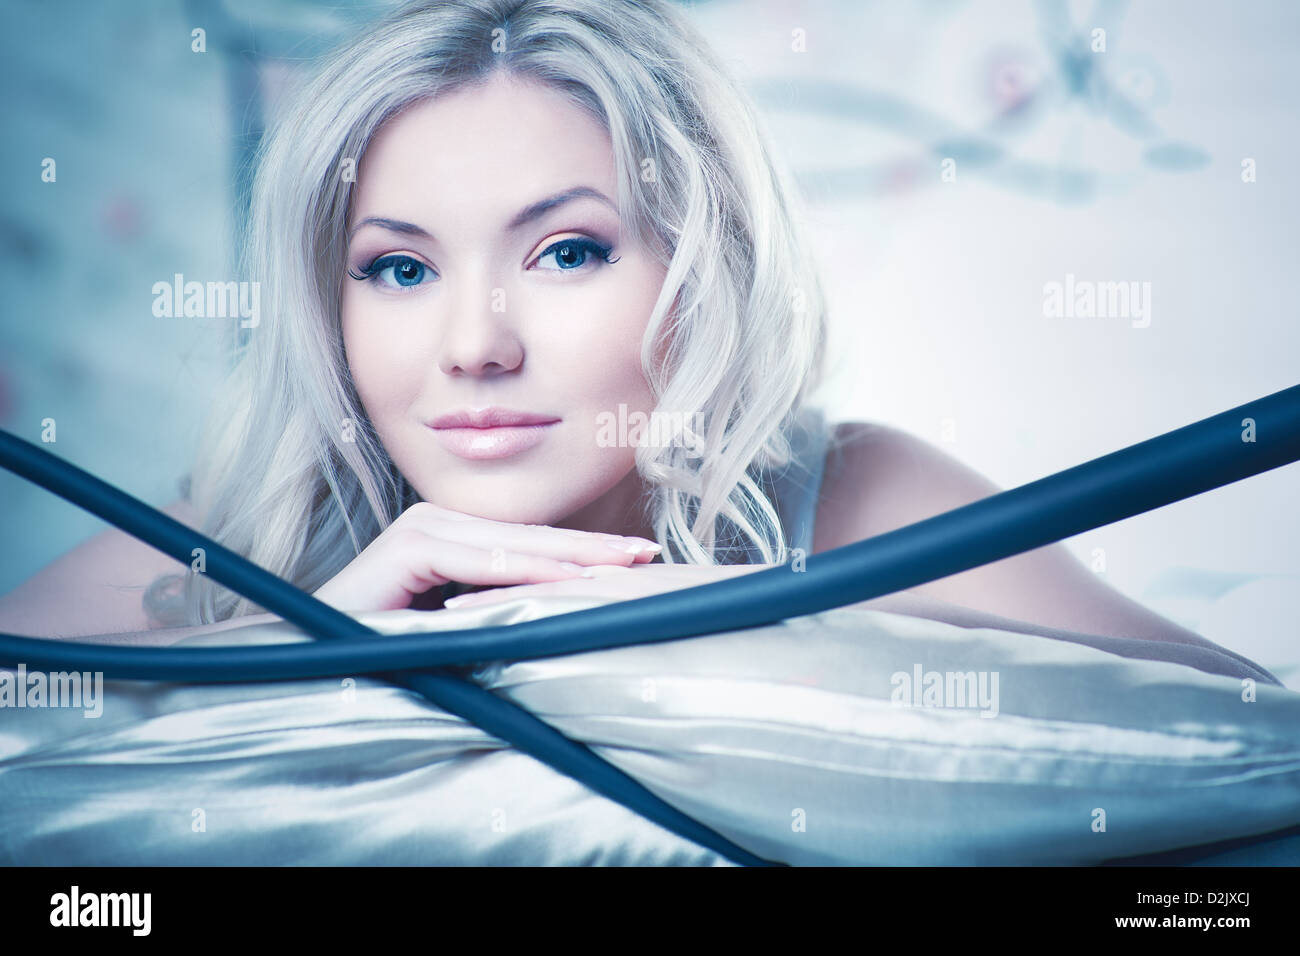 Young woman in bed. White and blue colors. Stock Photo